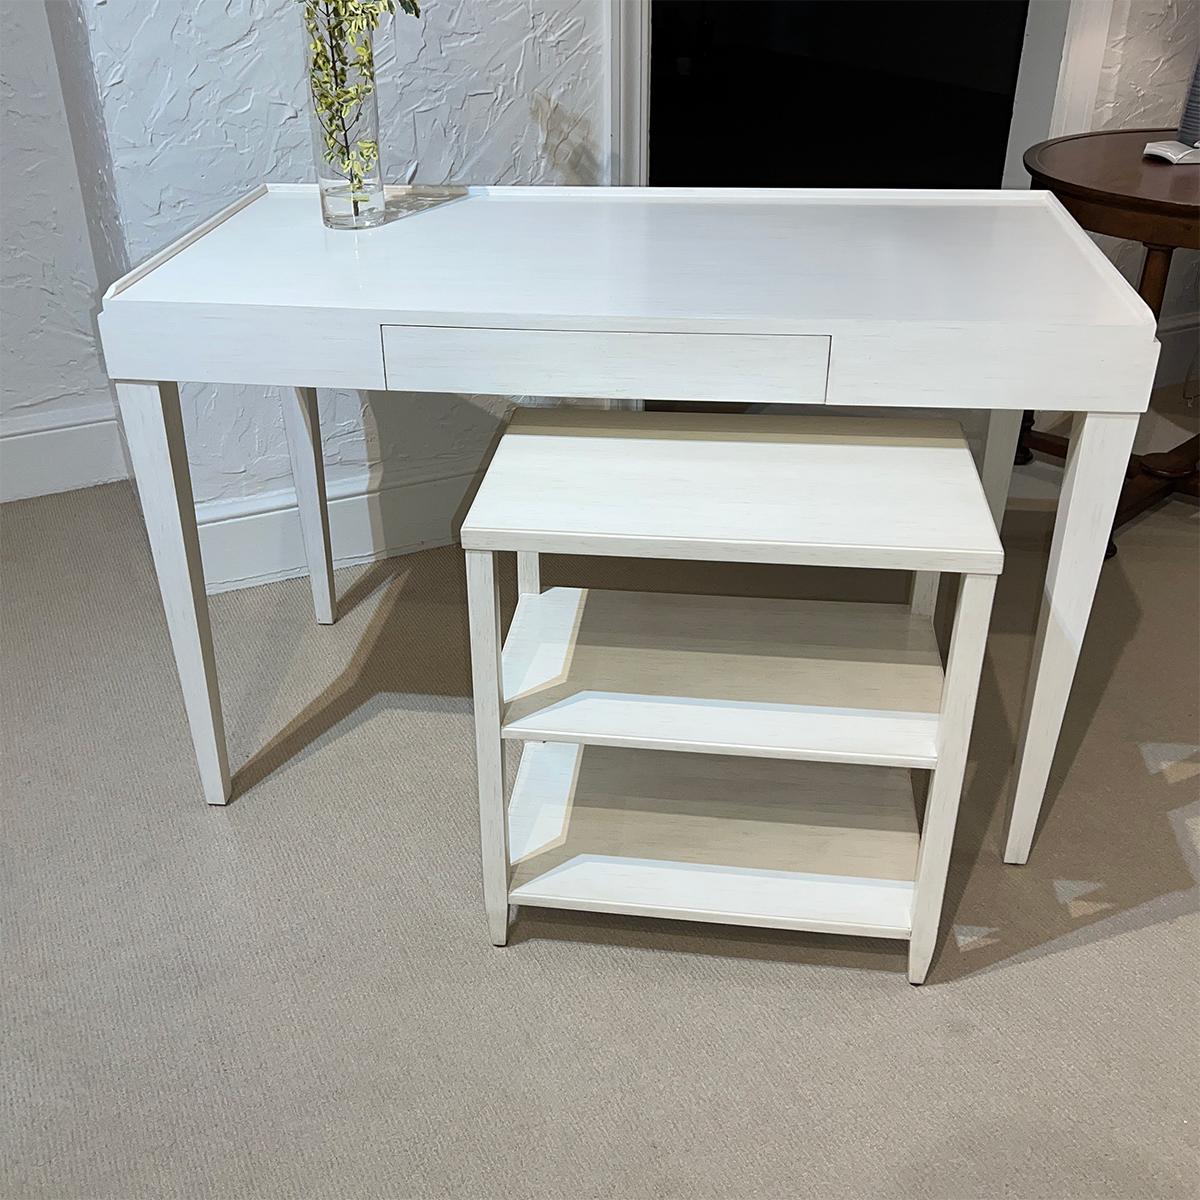 Mid-Century Modern Style Desk - Drift White In New Condition For Sale In Westwood, NJ